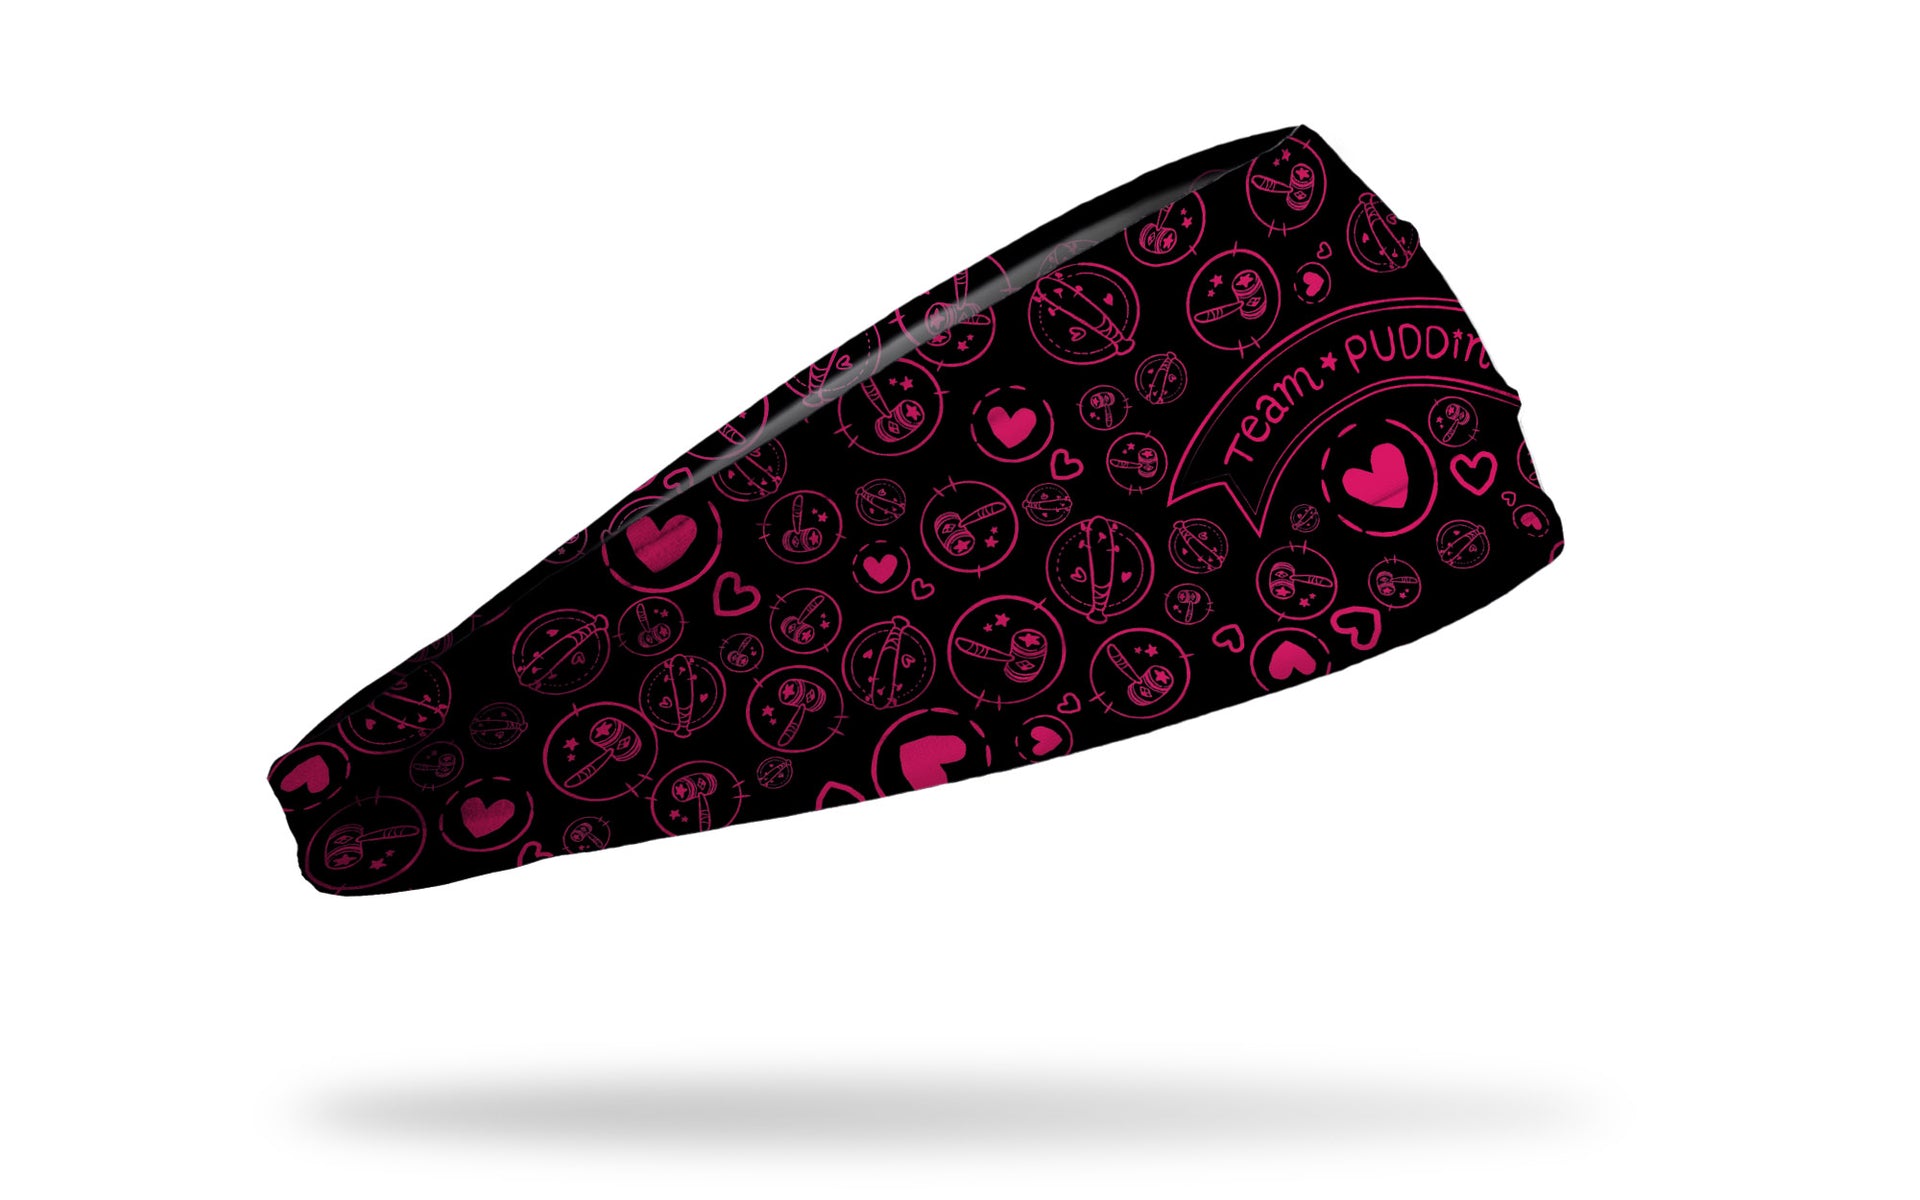 black headband with Harley Quinn Team Puddin' across front and Harley themed doodles in pink